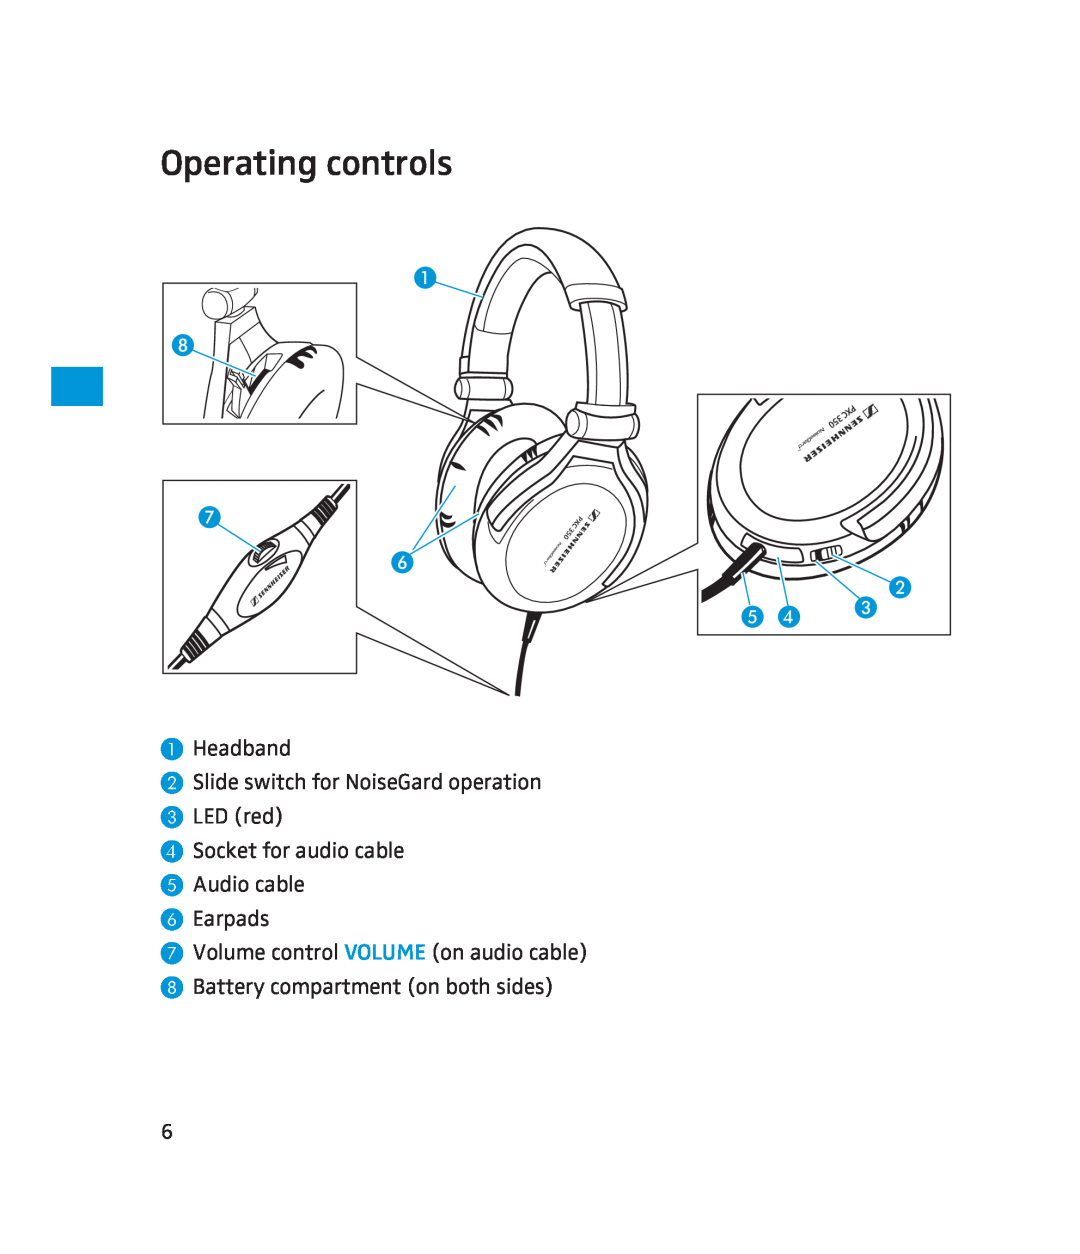 Sennheiser 500371 Operating controls, Headband Slide switch for NoiseGard operation, Battery compartment on both sides 